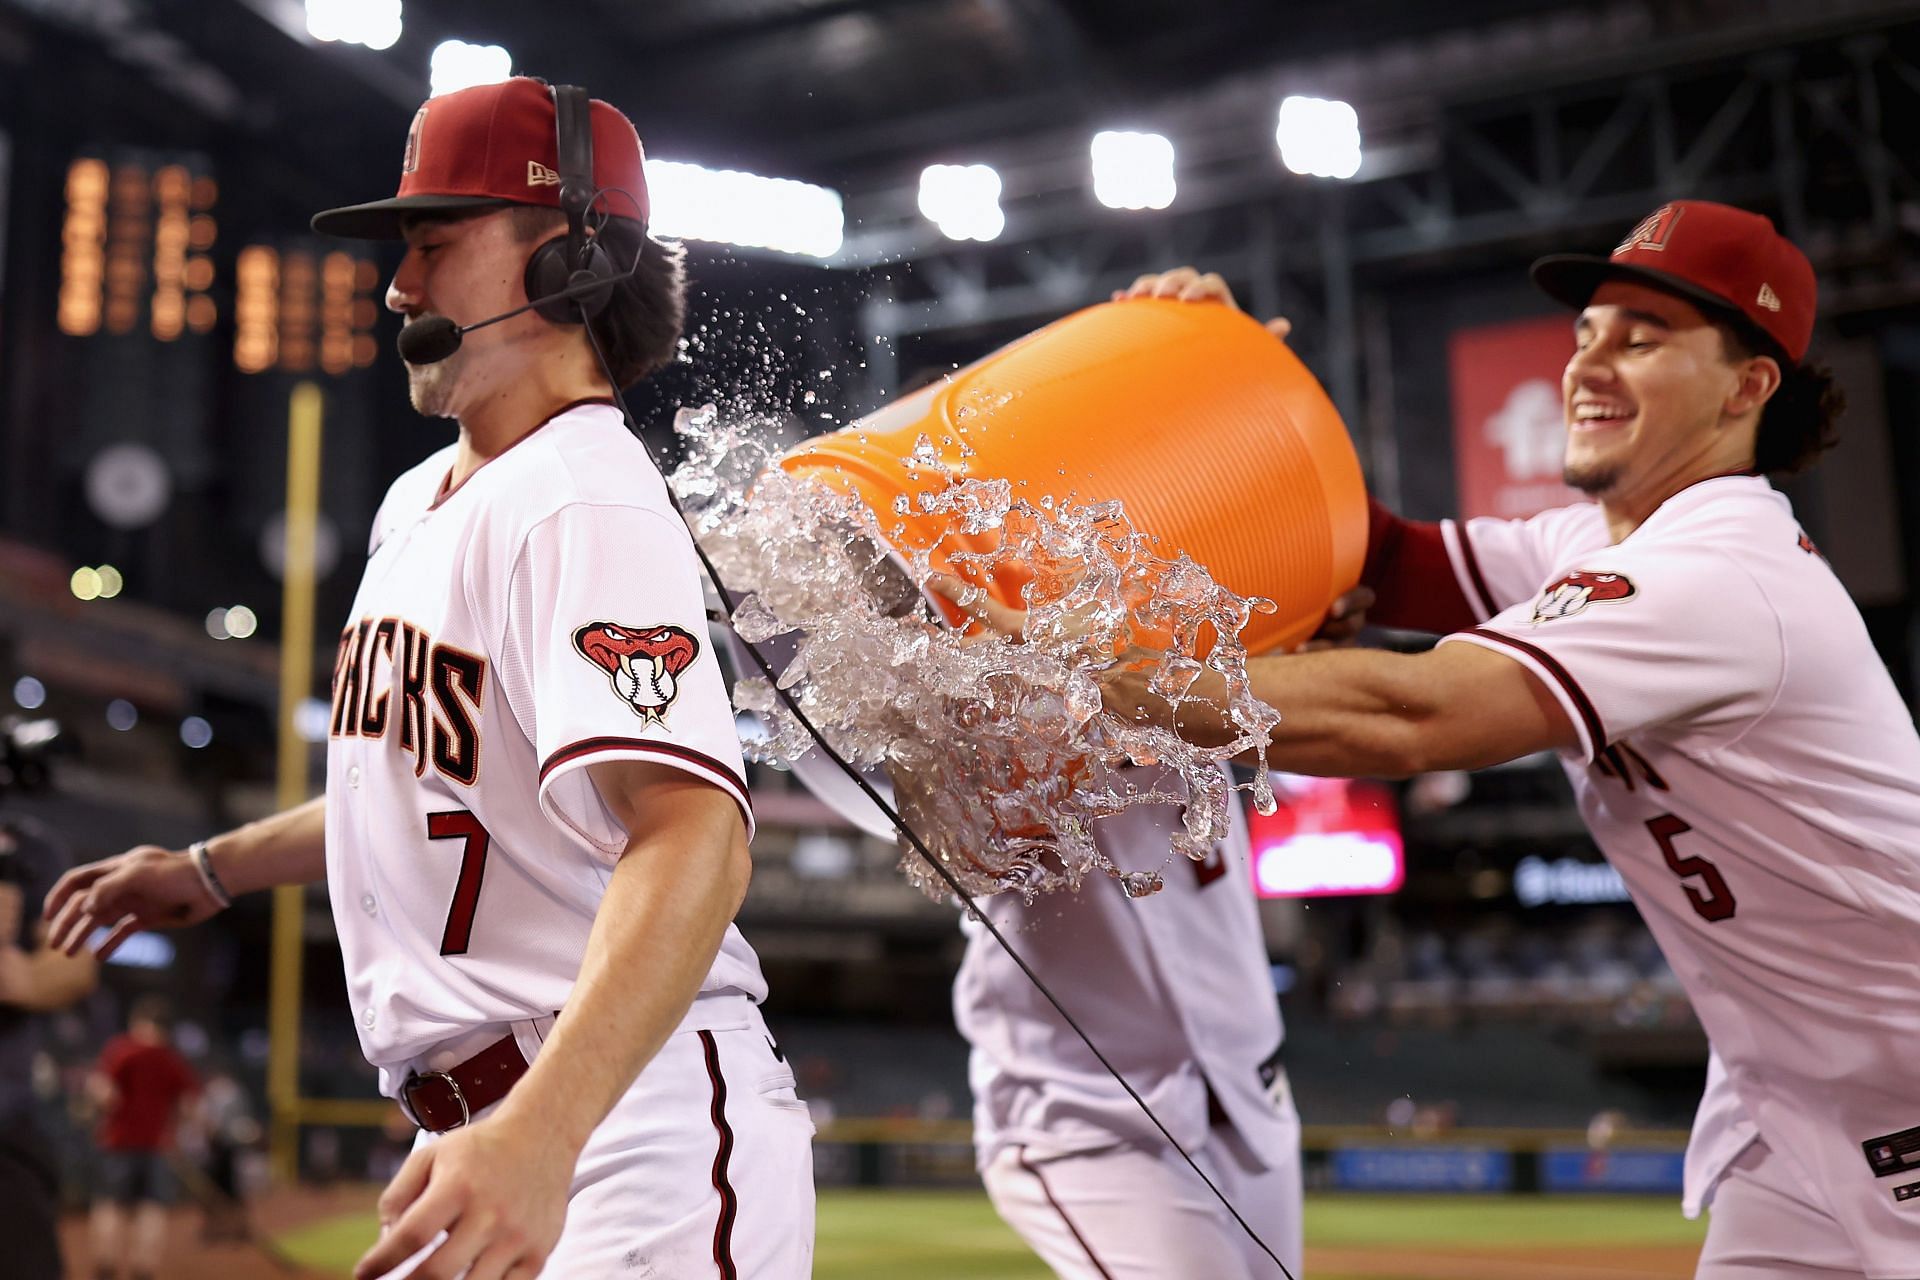 D-backs' Manager Lovullo renews friendship with Japanese teammate